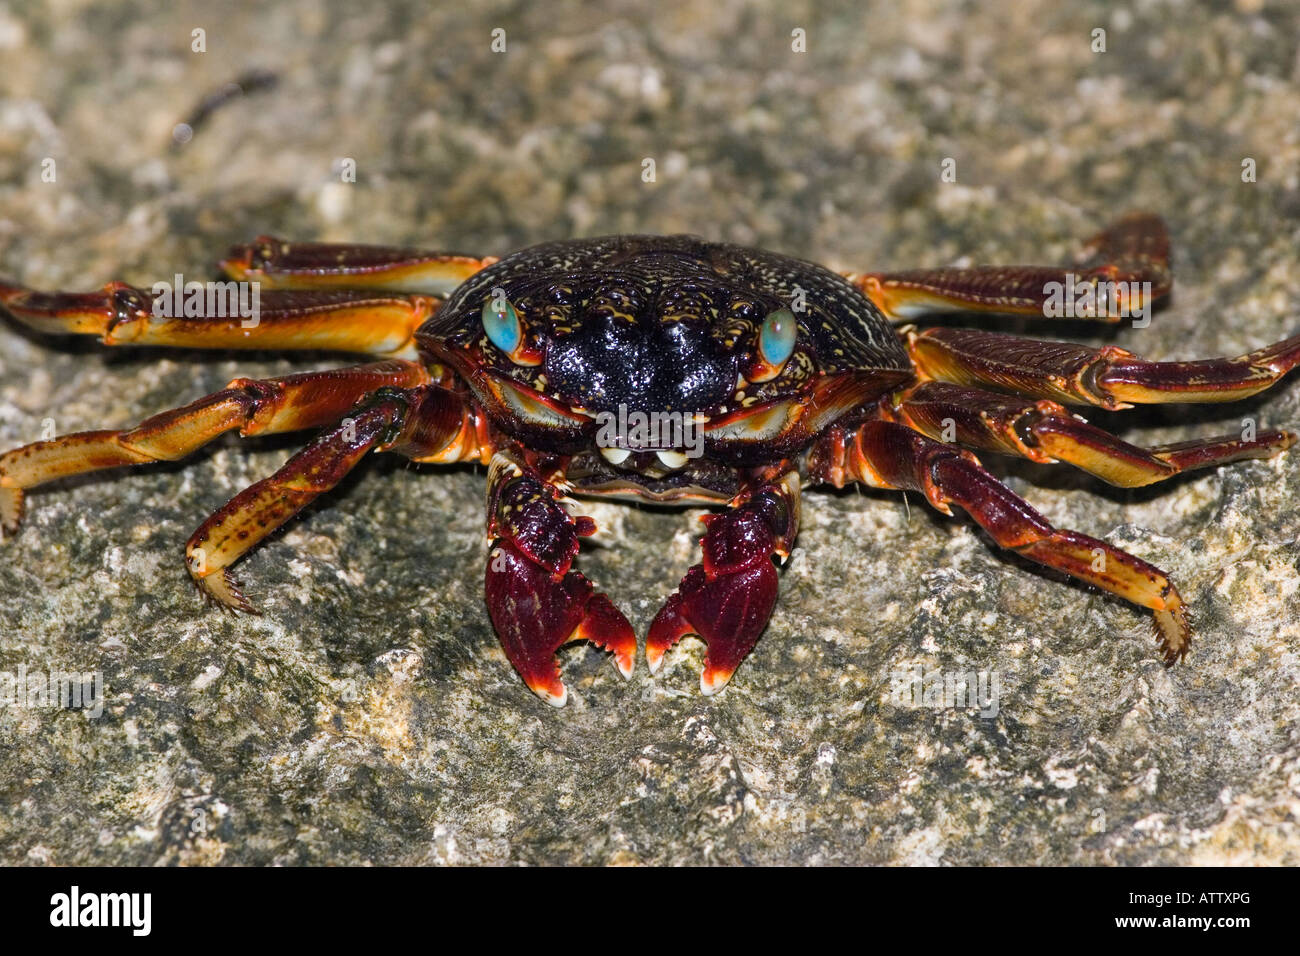 Rock or grapsid crabs, Grapsus sp, live on rocky shores and in the nearby shallow water, Fiji. Stock Photo